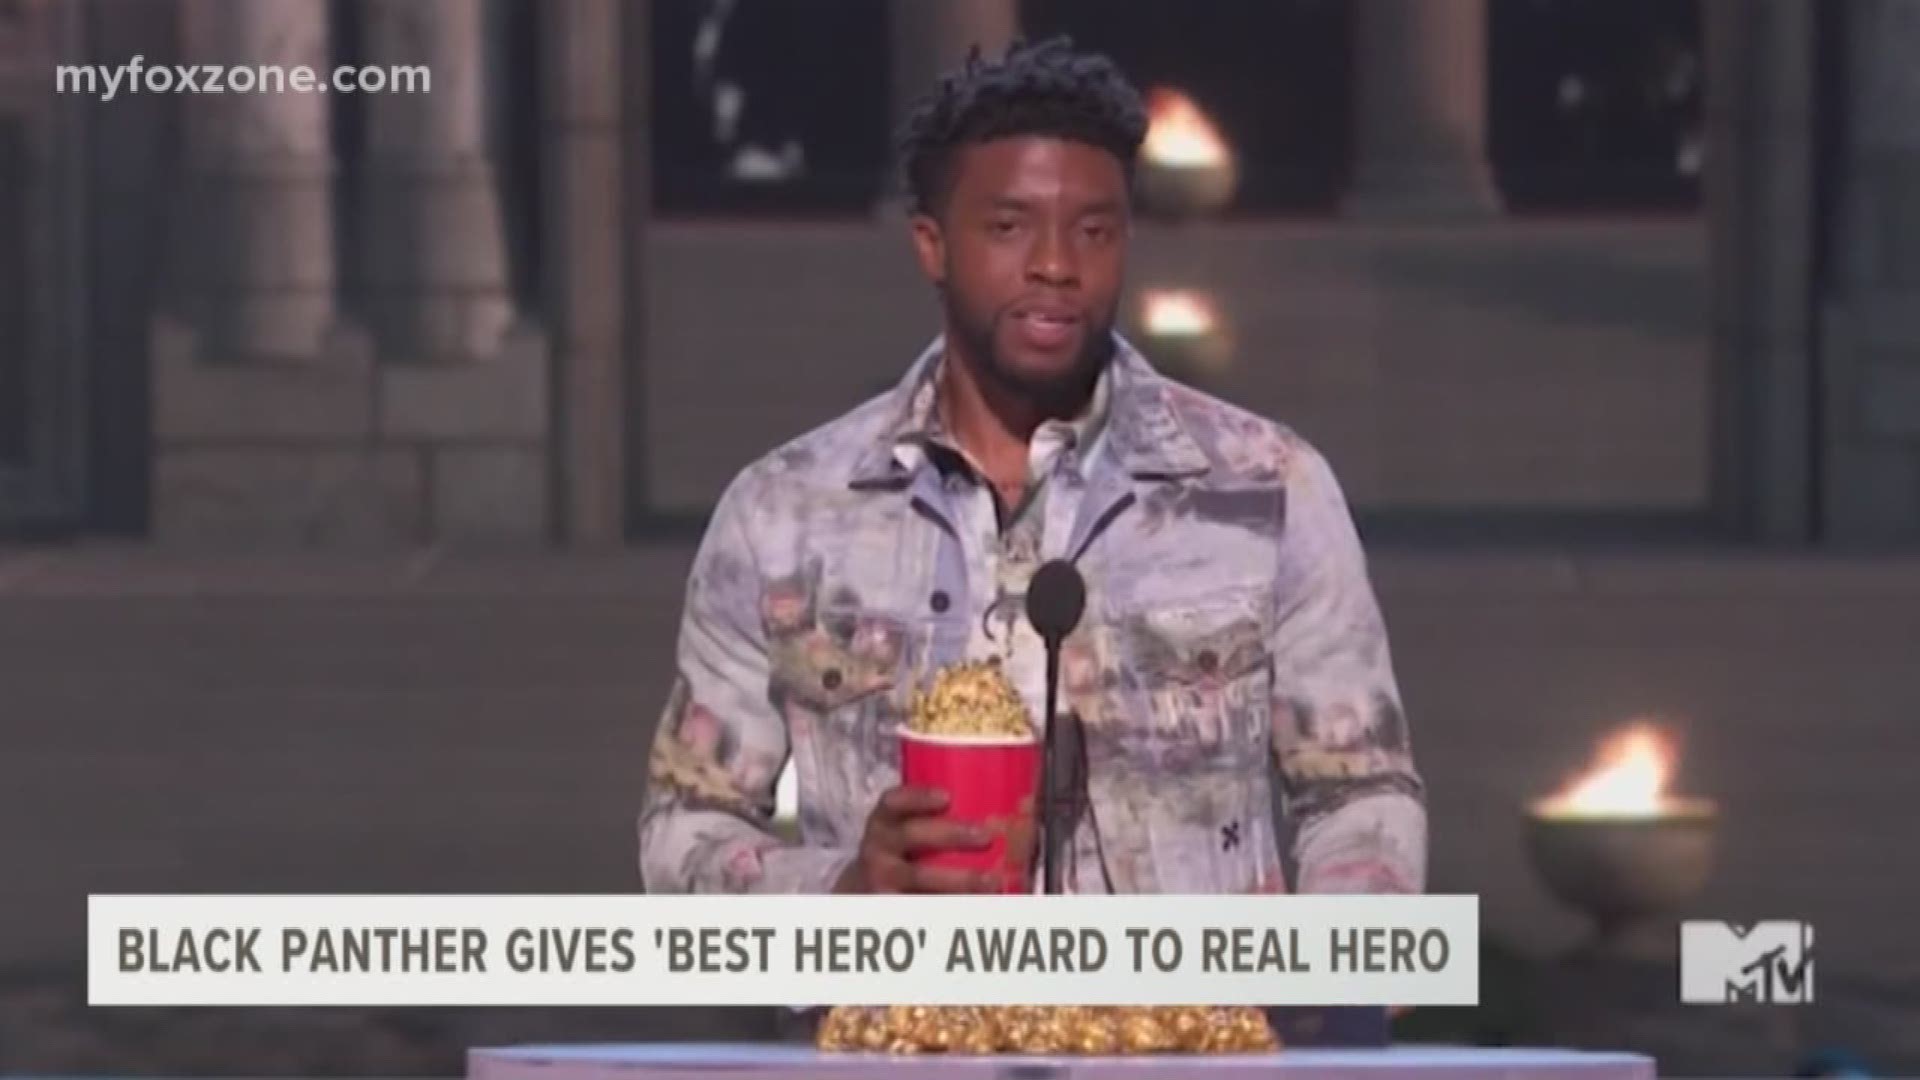 Our Malik Mingo shares details on how Black Panther star, Chadwick Boseman honored a real hero during his "Best Hero" award speech at the 2018 MTV Movie and TV Awards.